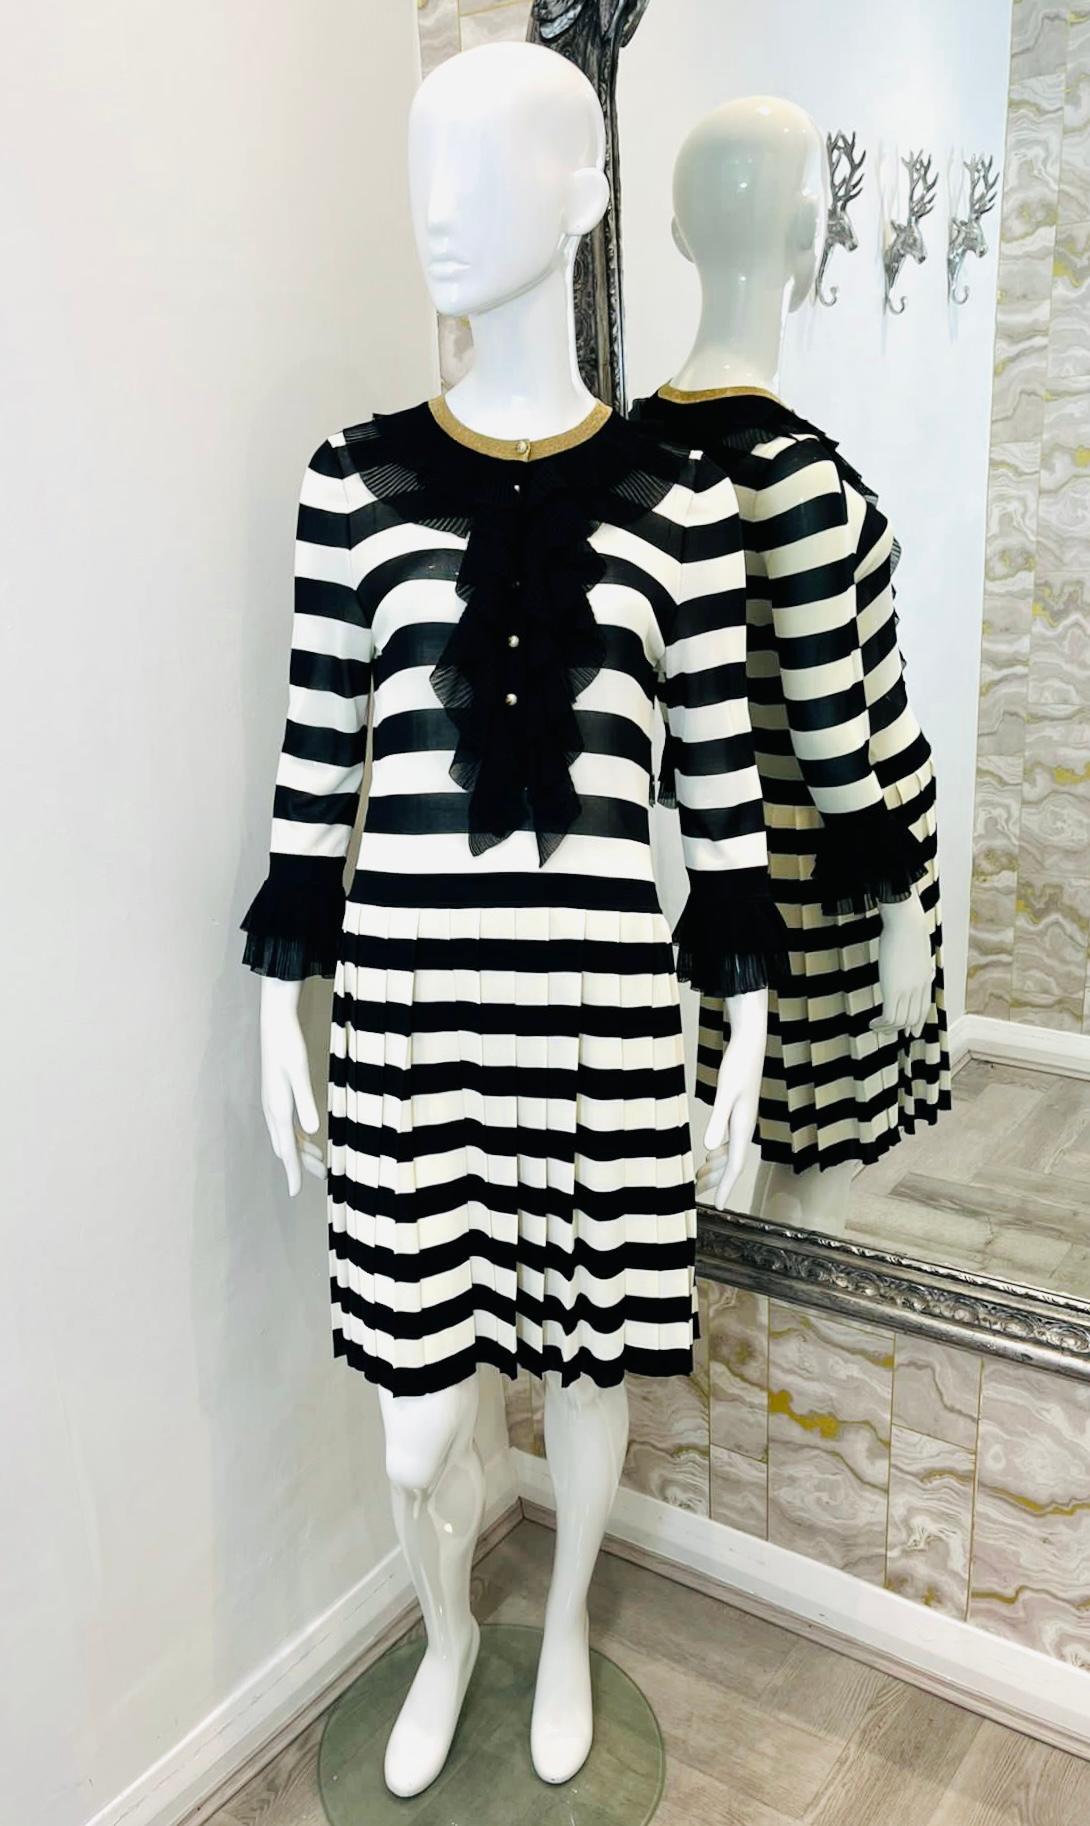 Gucci Striped Dress with 'GG' Pearl Buttons

Black & white dress designed with vertical striped pattern.

Detailed with gold 'GG' logo pearl buttons along the centre.

Featuring black lace ruffle accent to the neckline and cuffs.

Short, pleated